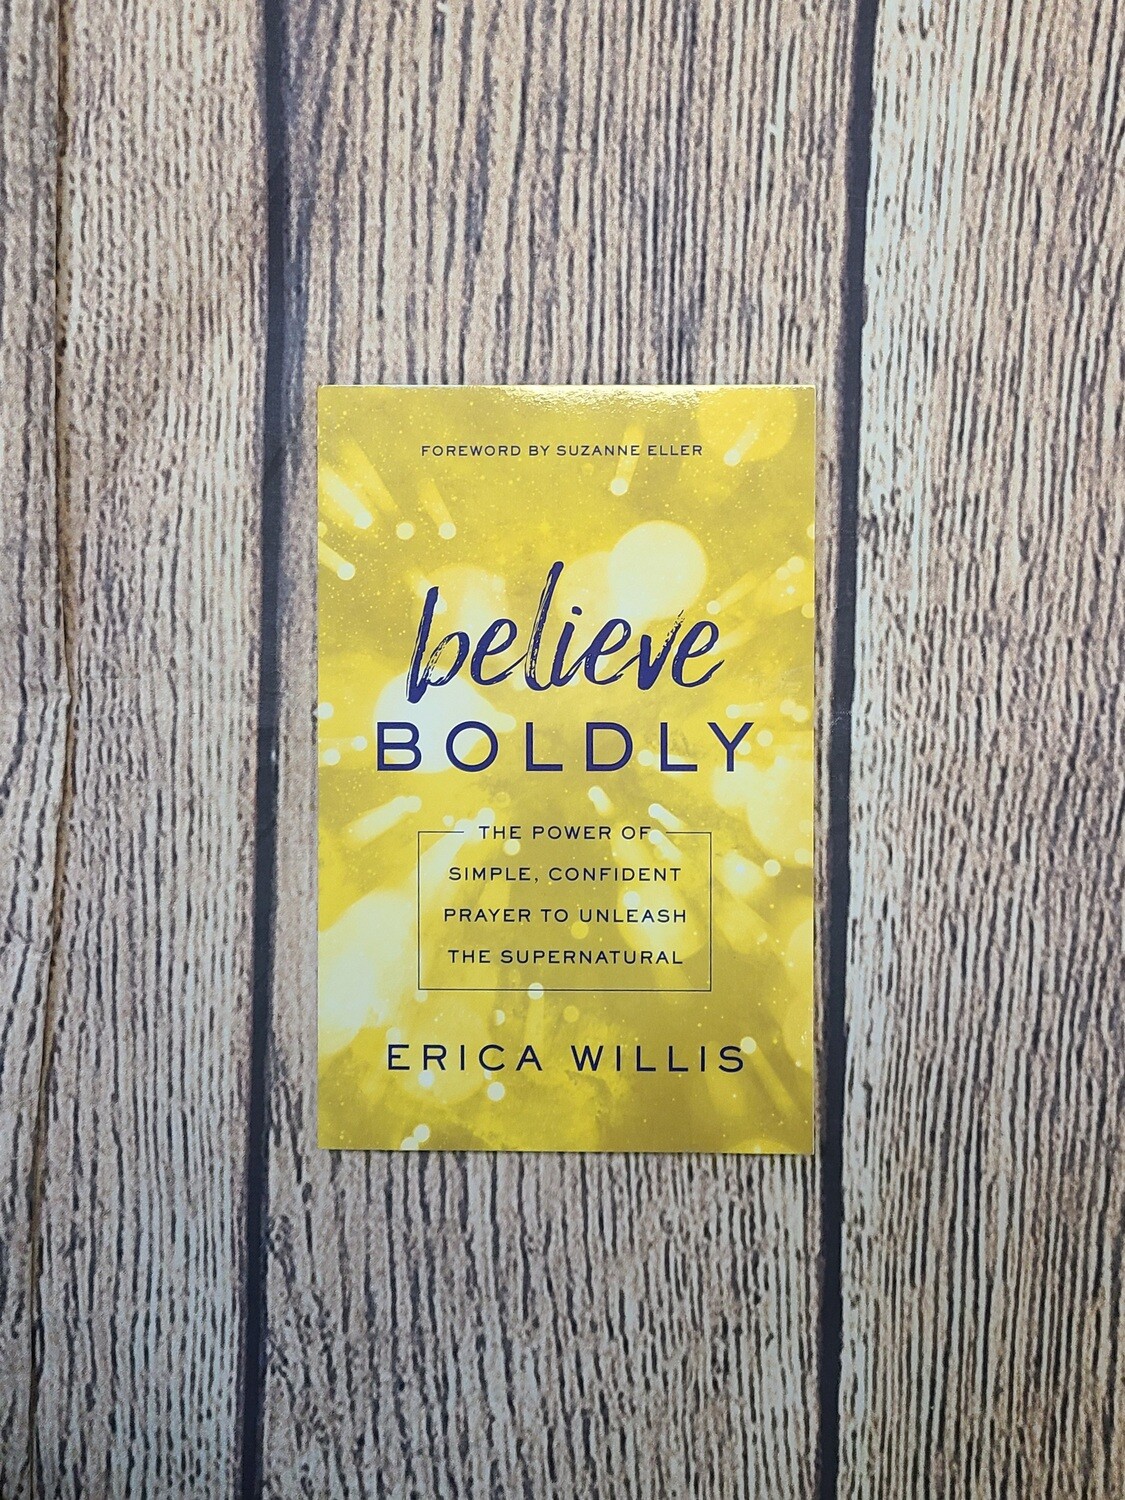 Believe Boldly: The Power of Simple, Confident Prayer to Unleash the Supernatural by Erica Willis